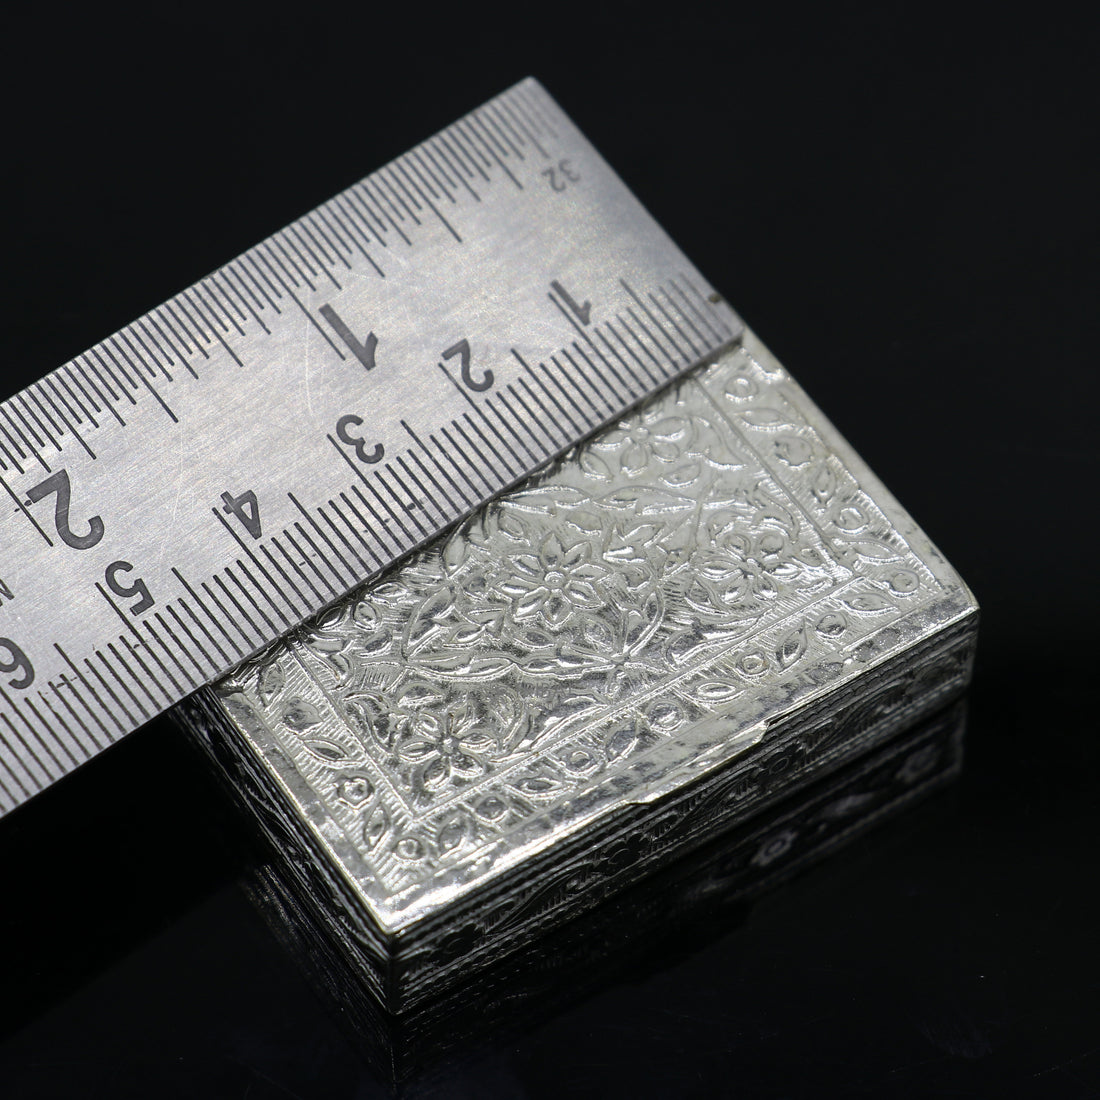 2"X1.2" 925 sterling silver trinket box, kajal box/casket box brides rectangle shape box collection, container box, eyeliner box stb821 - TRIBAL ORNAMENTS